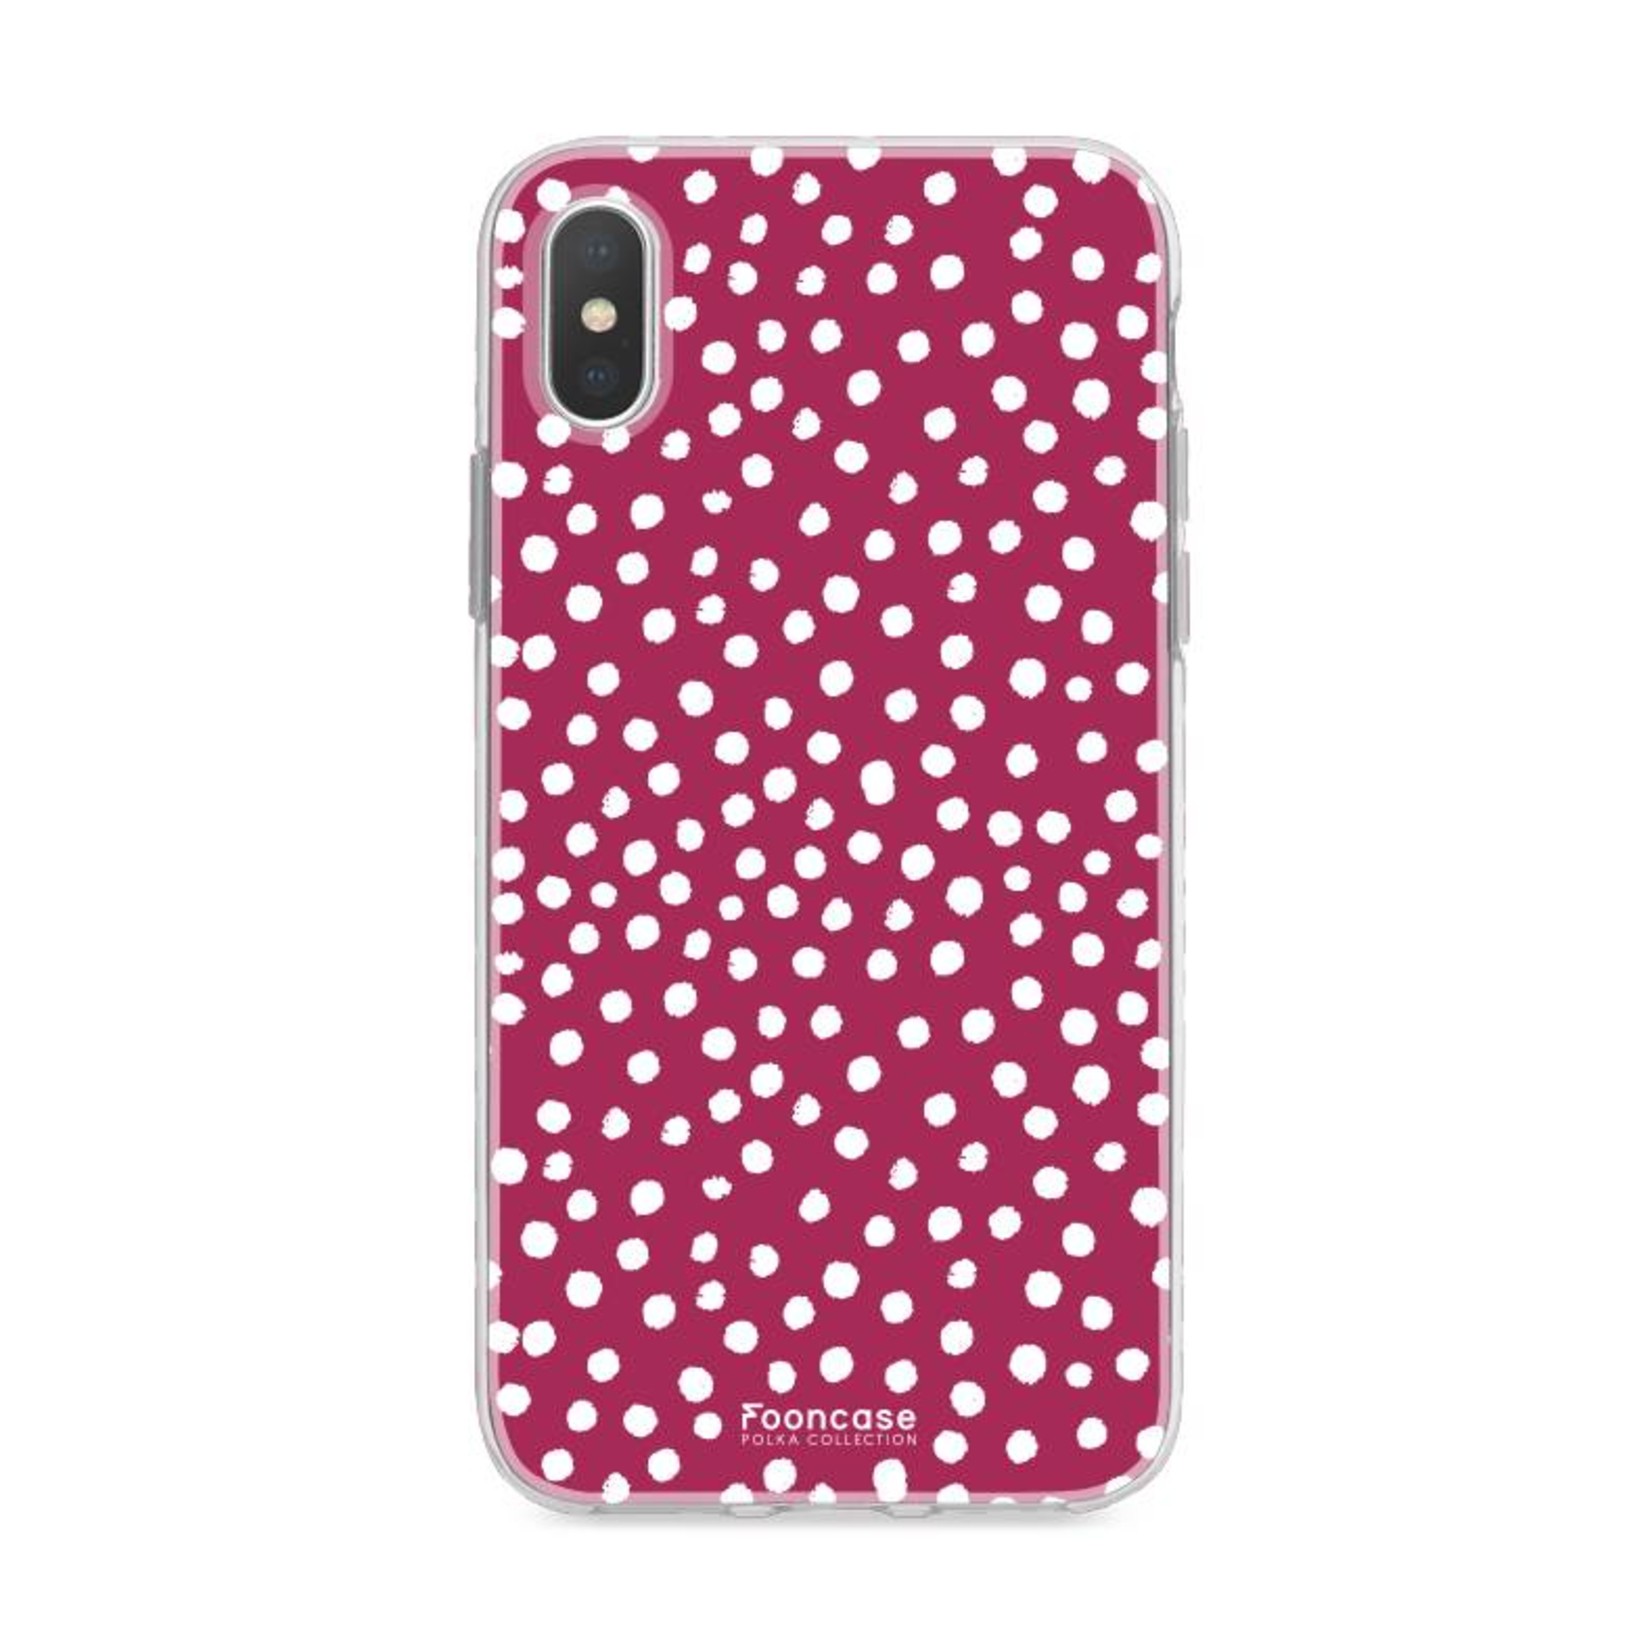 FOONCASE Iphone XS - POLKA COLLECTION / BordeauXS Rot